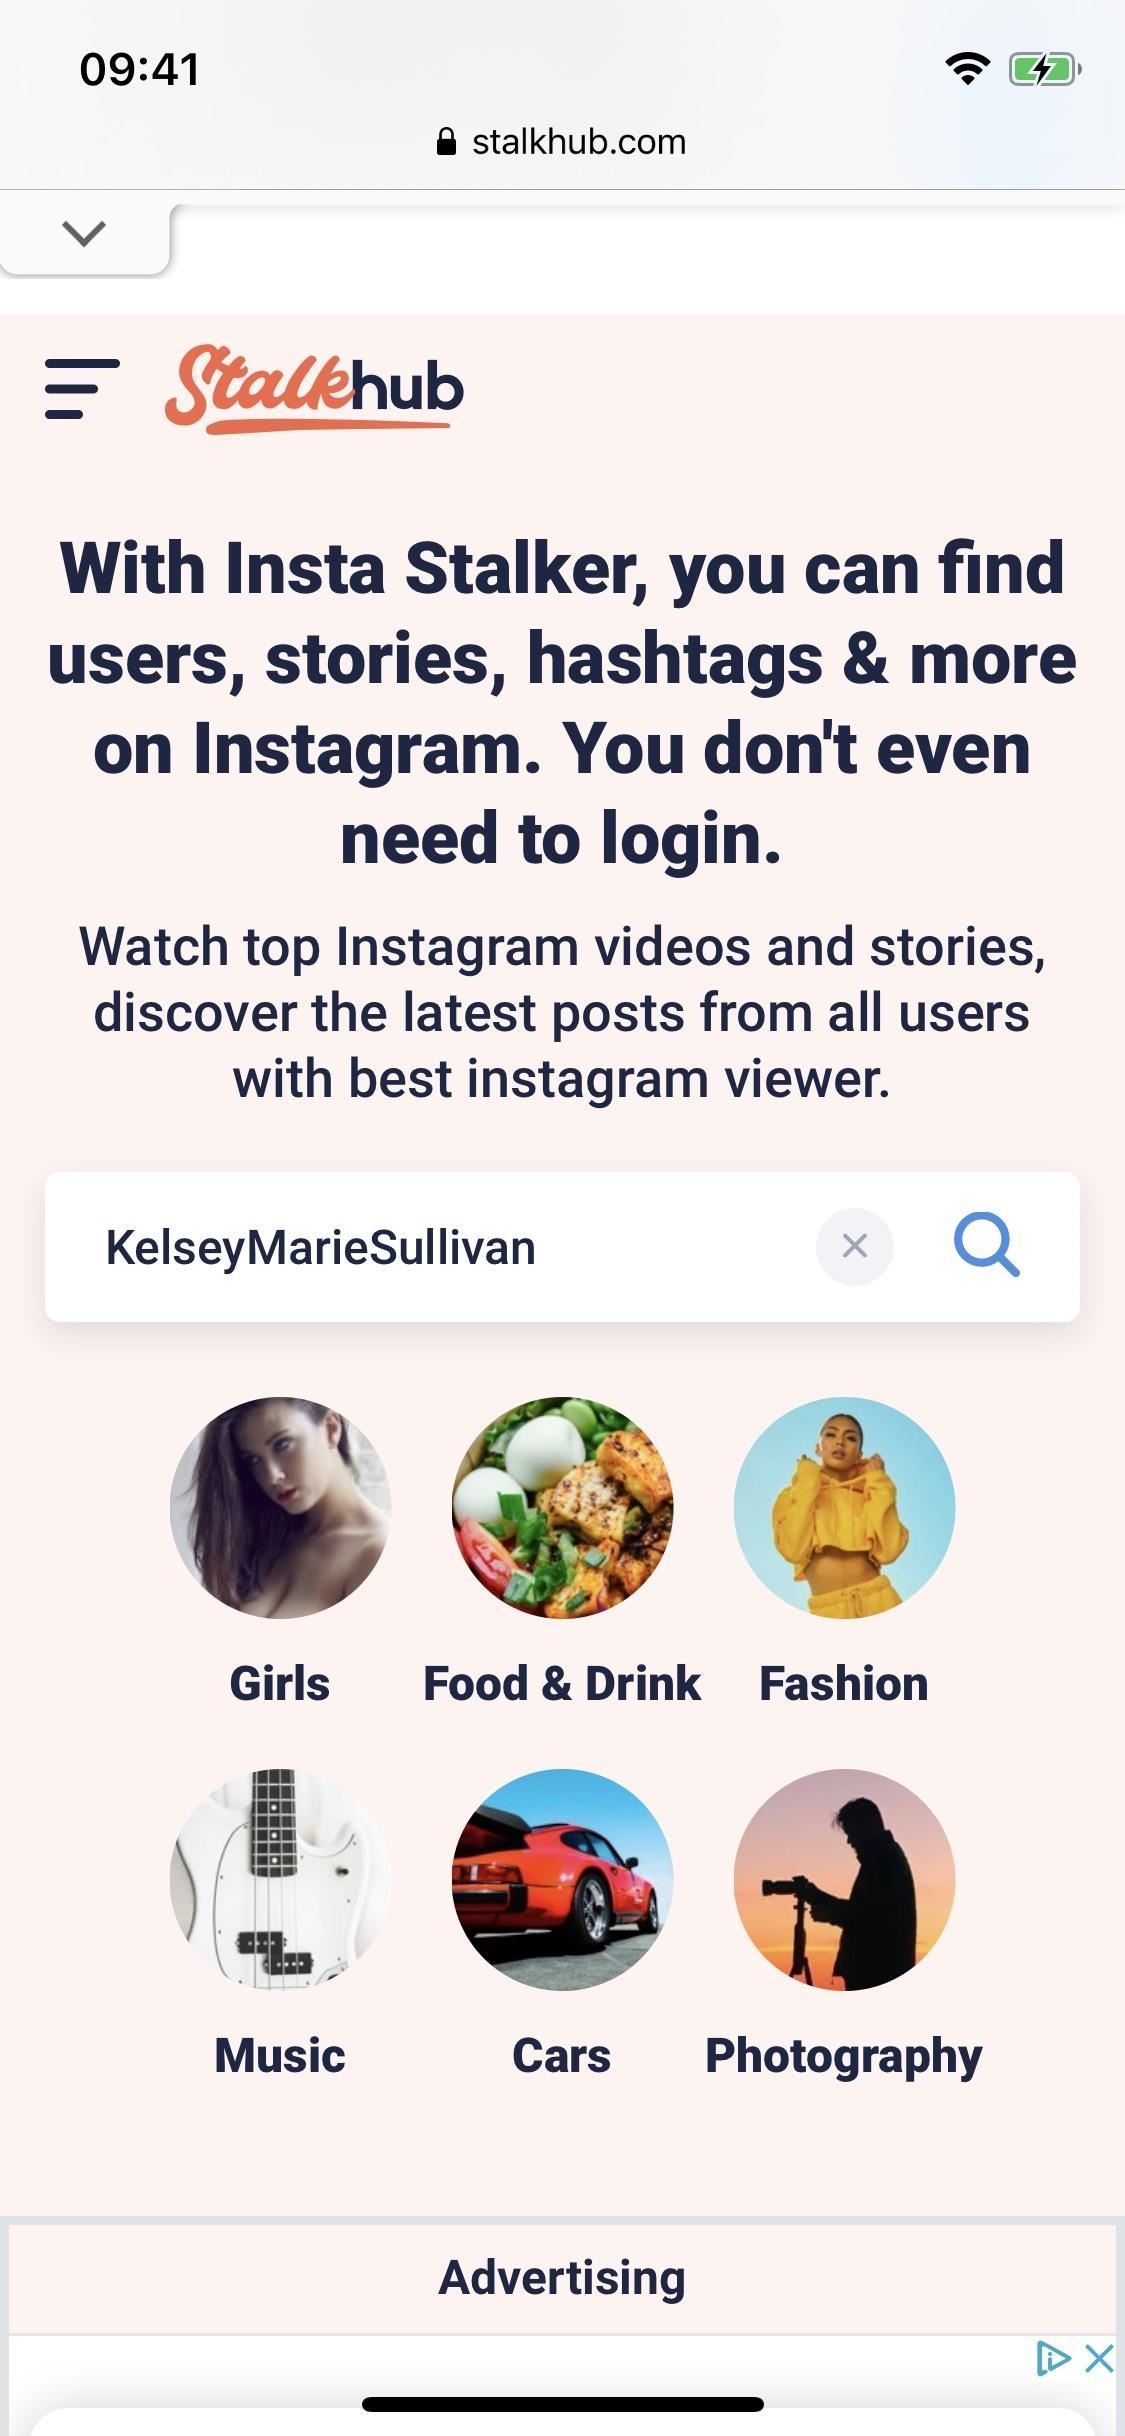 How to View Instagram Stories Anonymously [2022] - iGeeksBlog